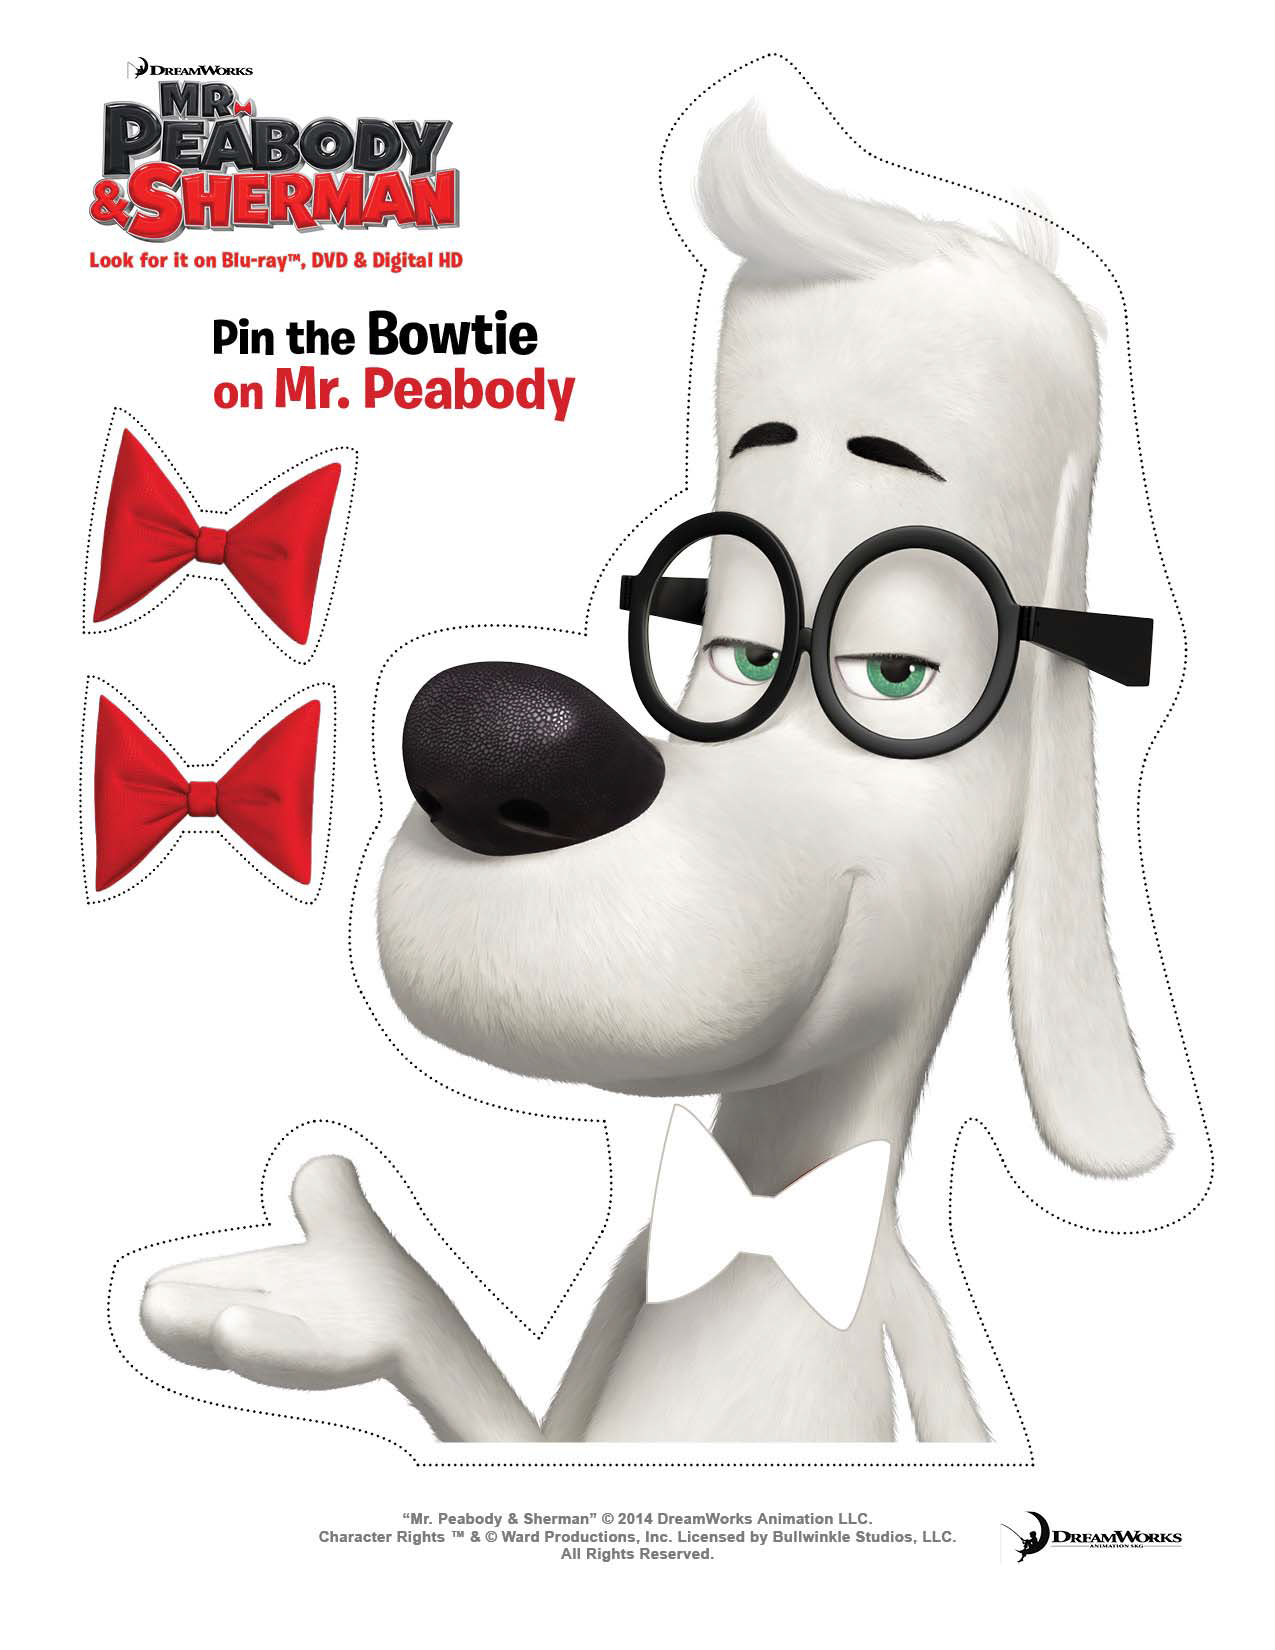 Pin The Bowtie on Mr. Peabody